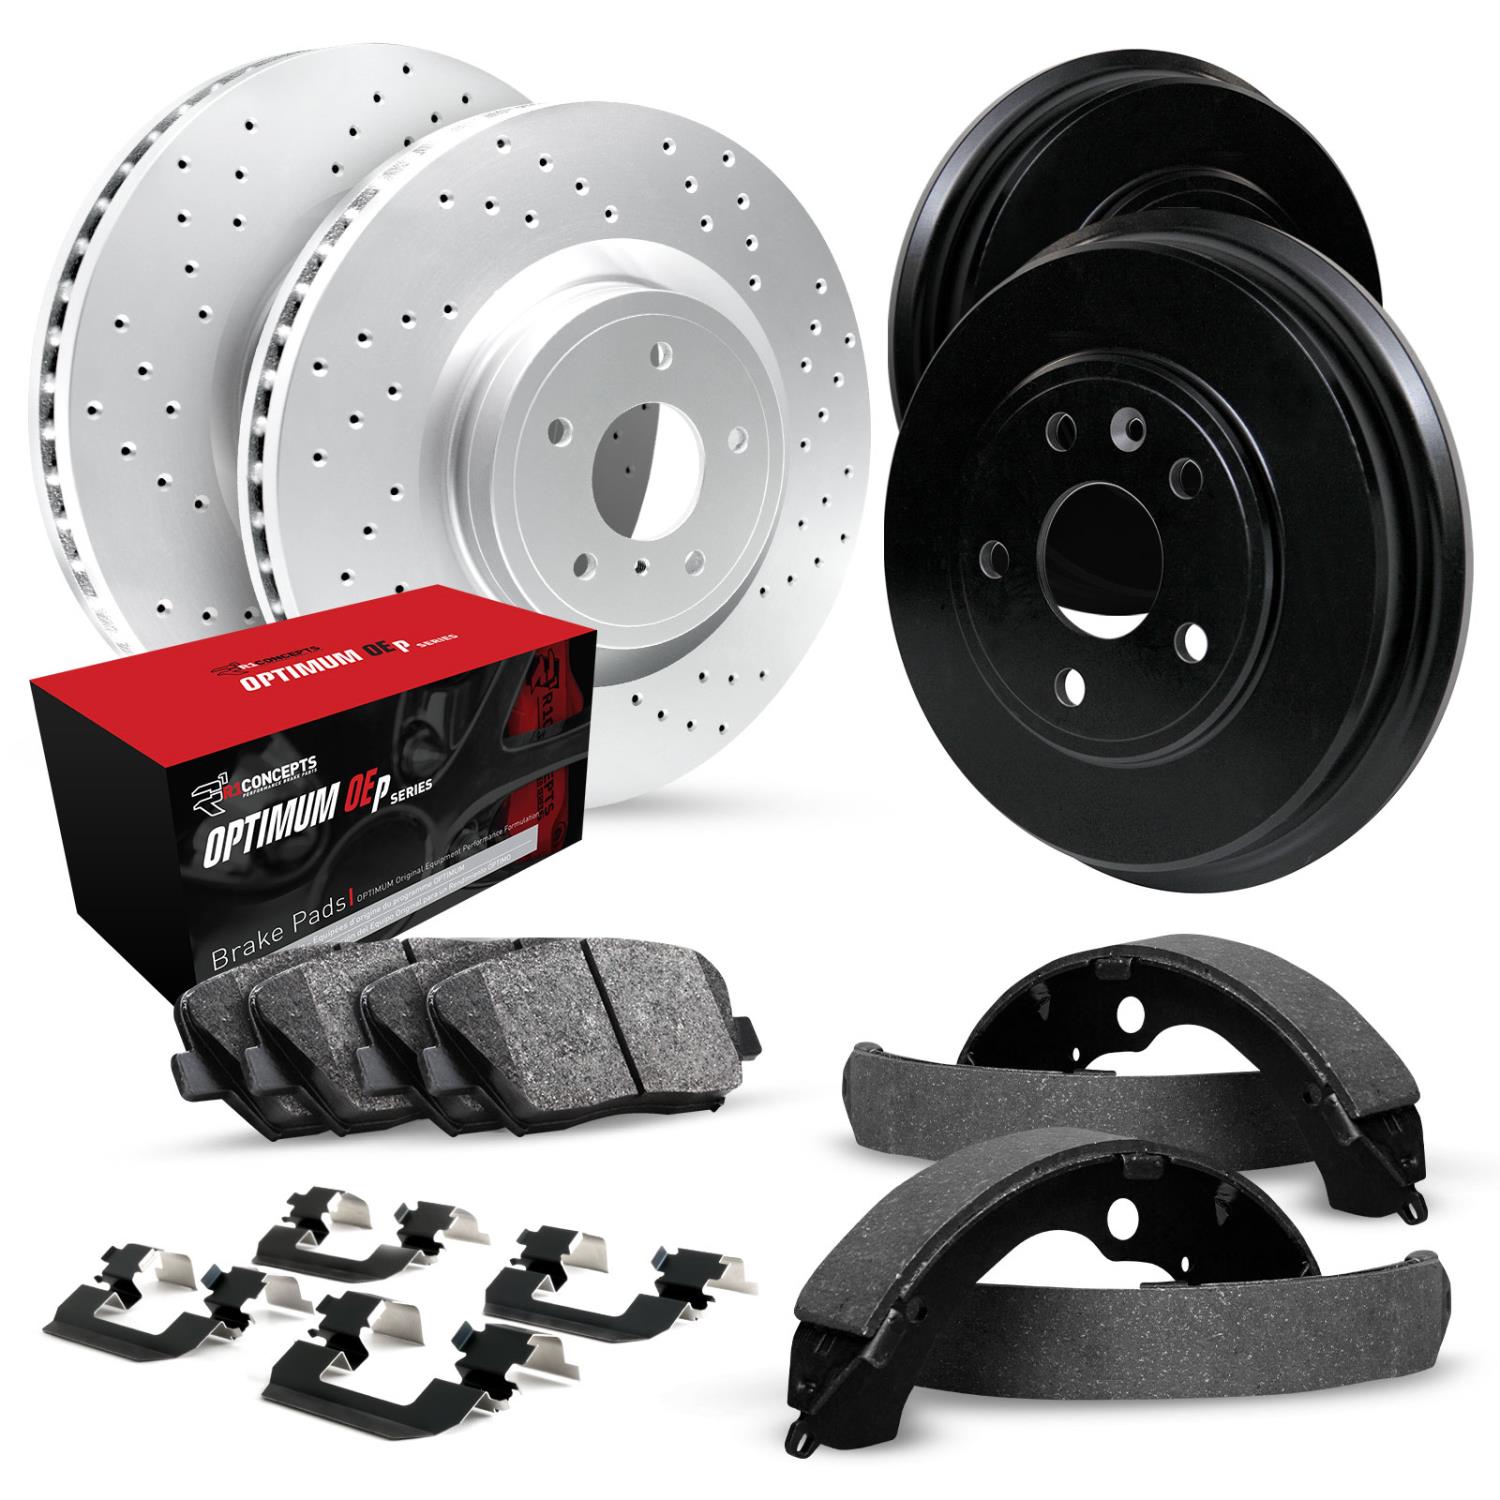 GEO-Carbon Drilled Brake Rotor & Drum Set w/Optimum OE Pads, Shoes, & Hardware, 1998-2003 GM, Position: Front & Rear